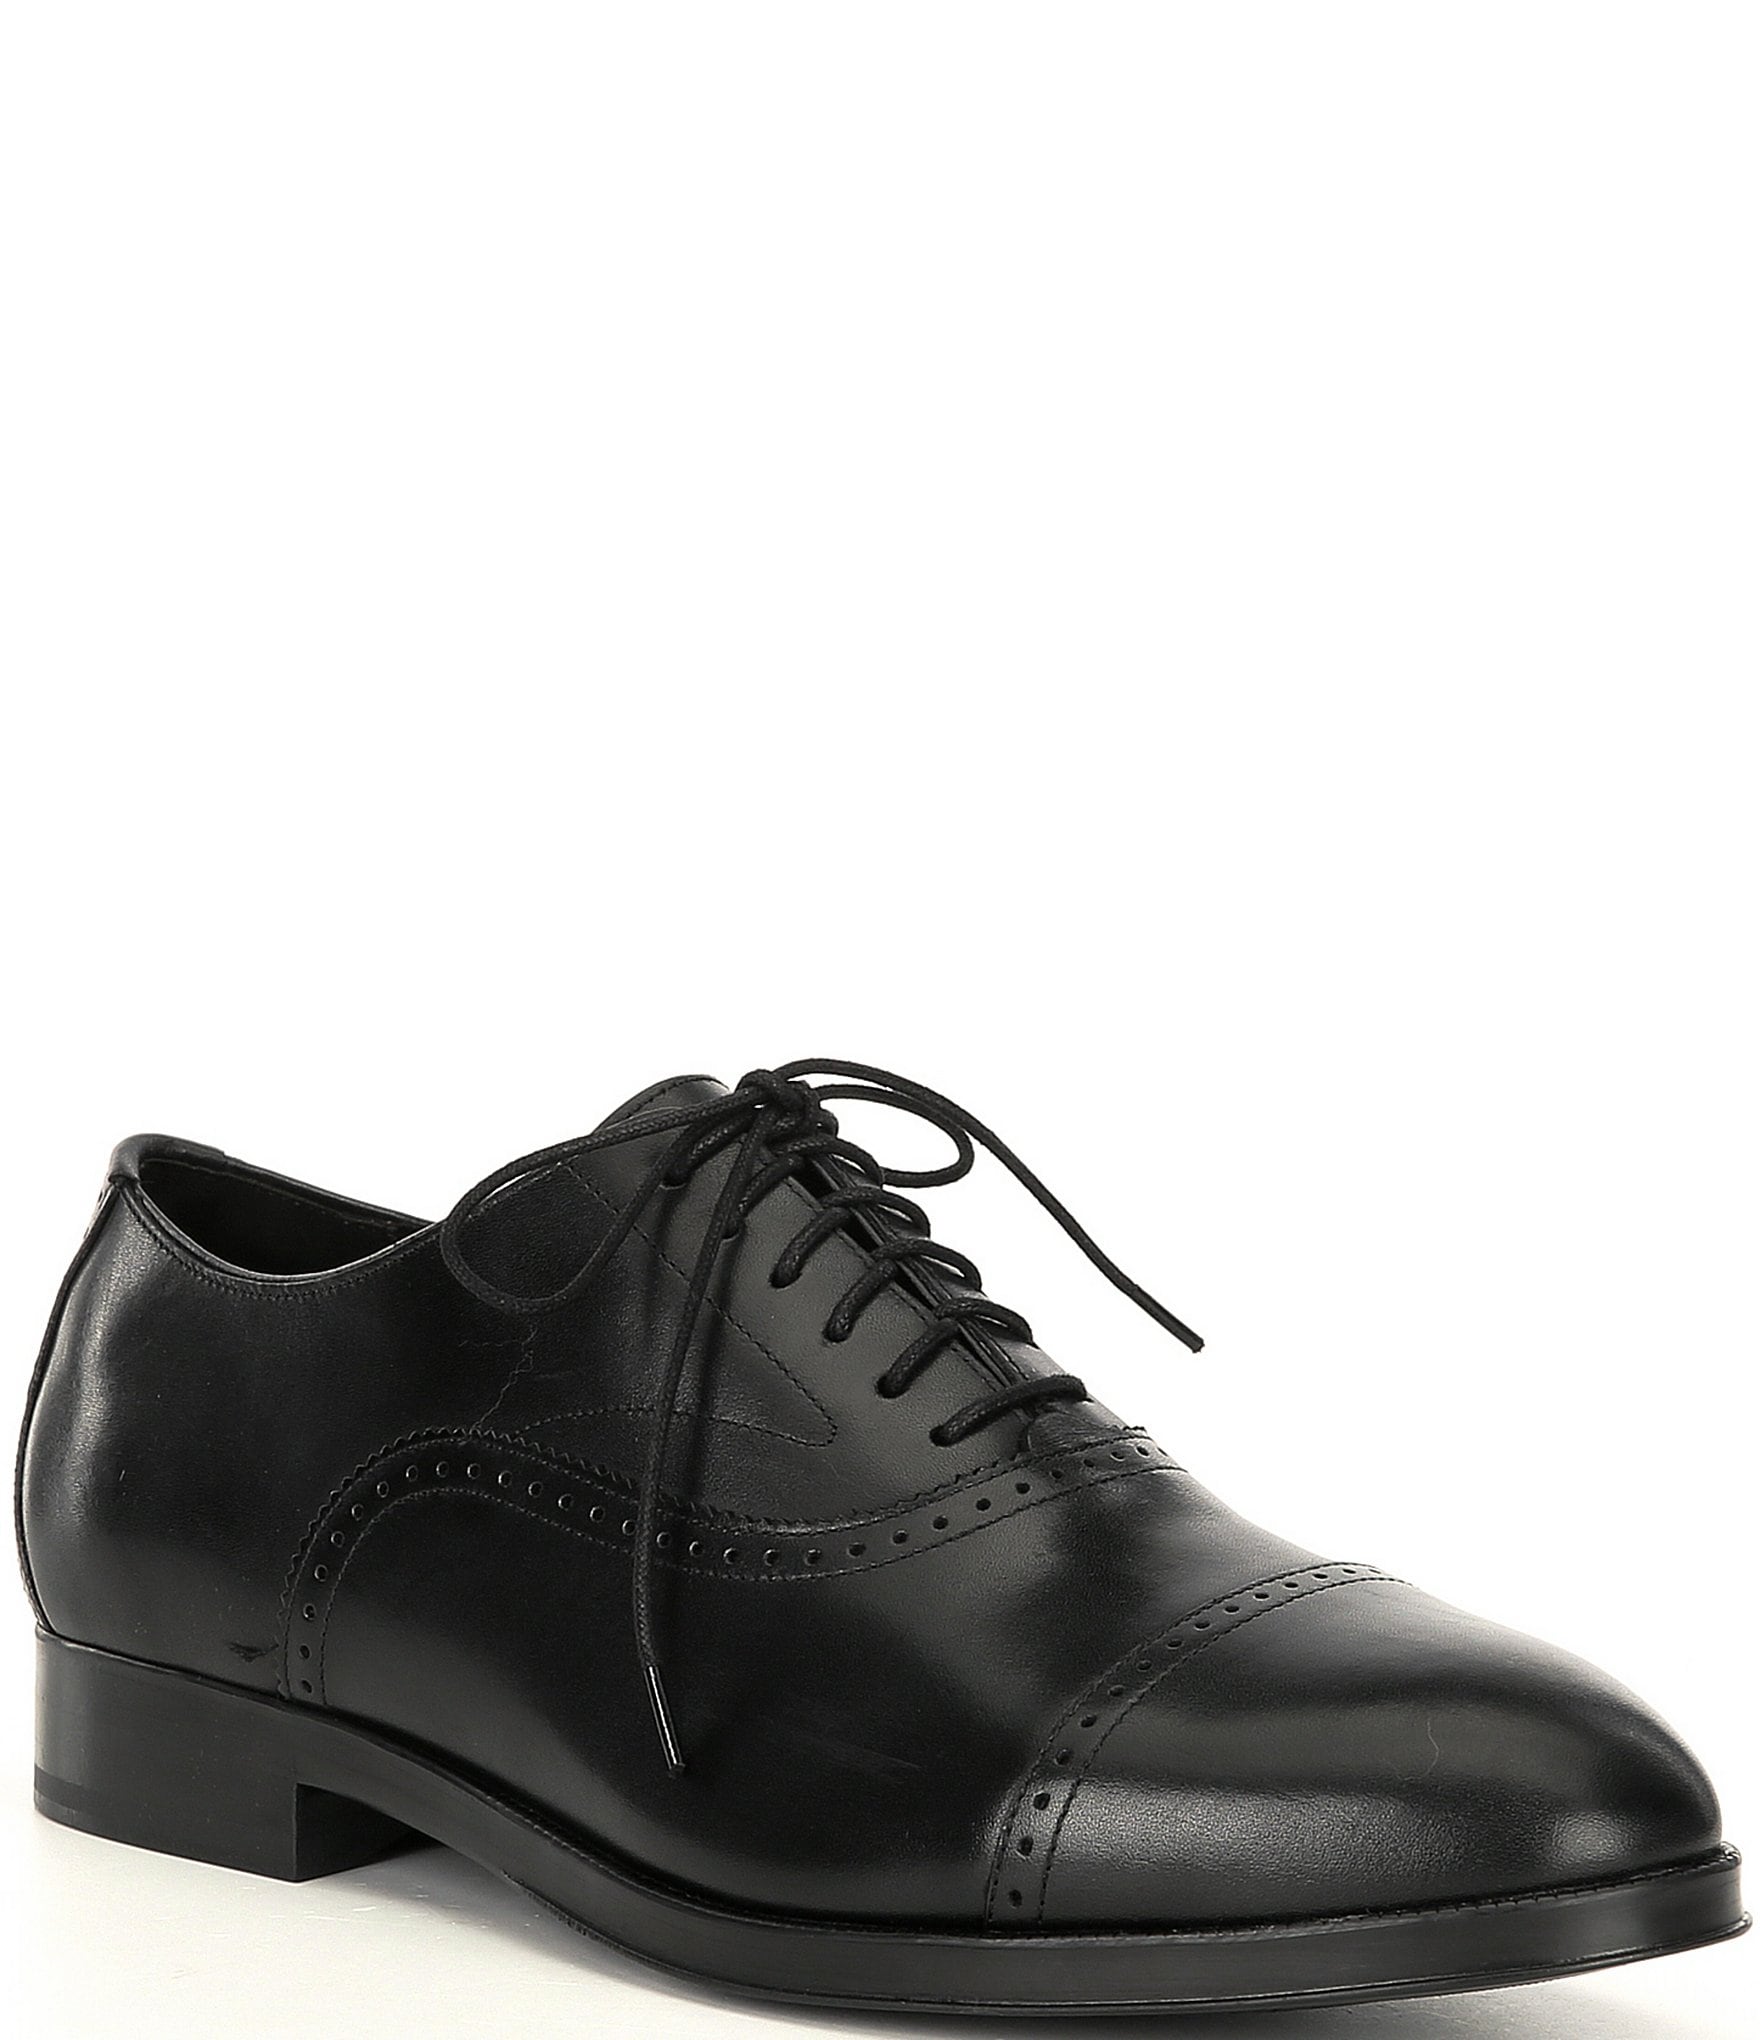 Cole Haan Grand 360 Plain Toe Oxford - recoveryparade-japan.com